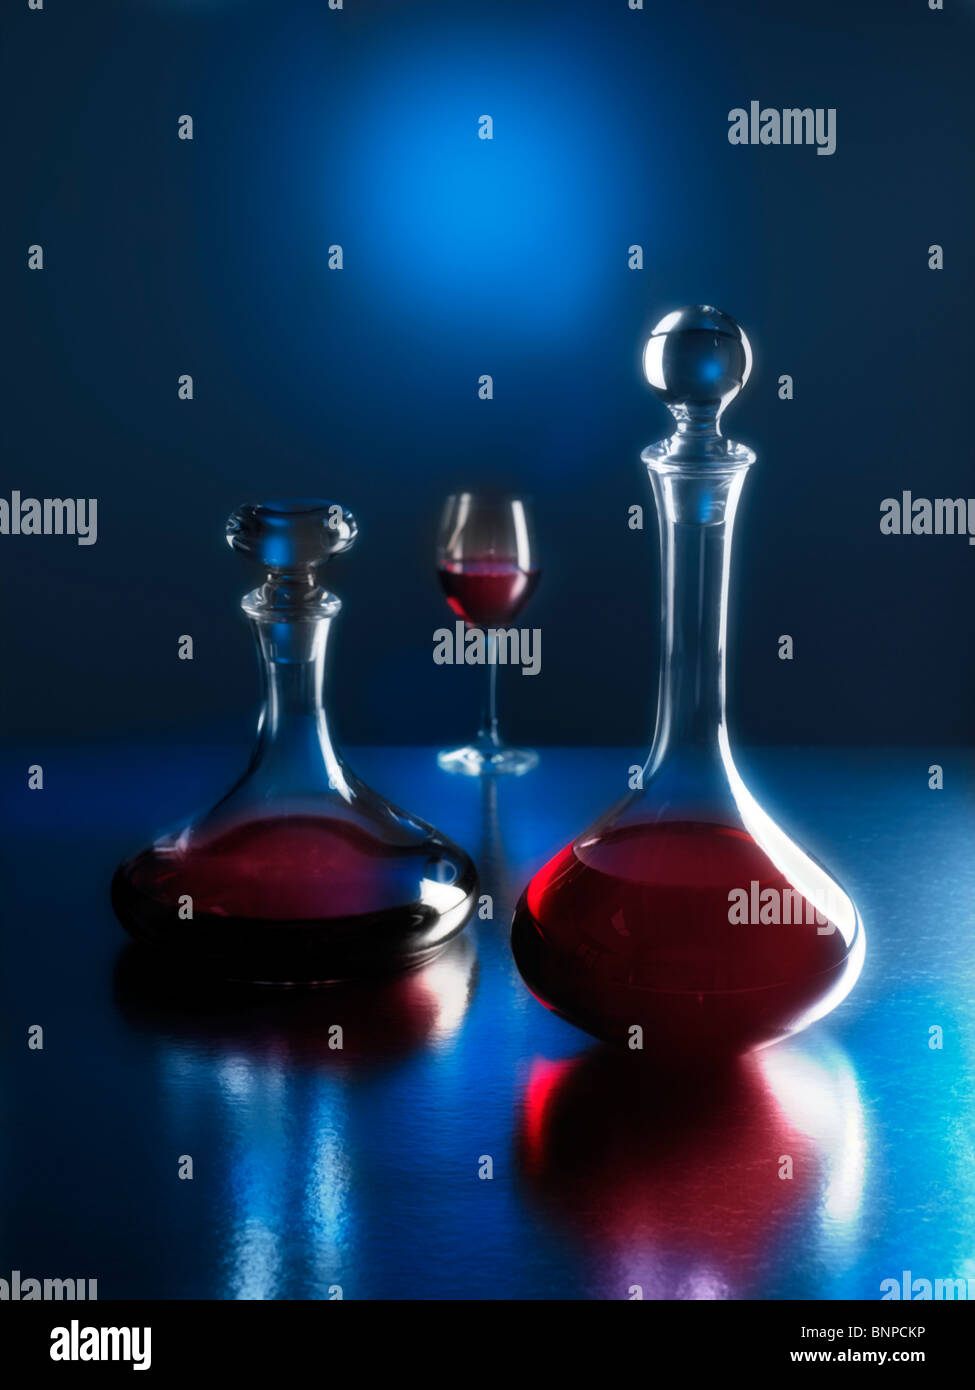 Two moonlit decanters with red wine and glass in background with reflections Stock Photo